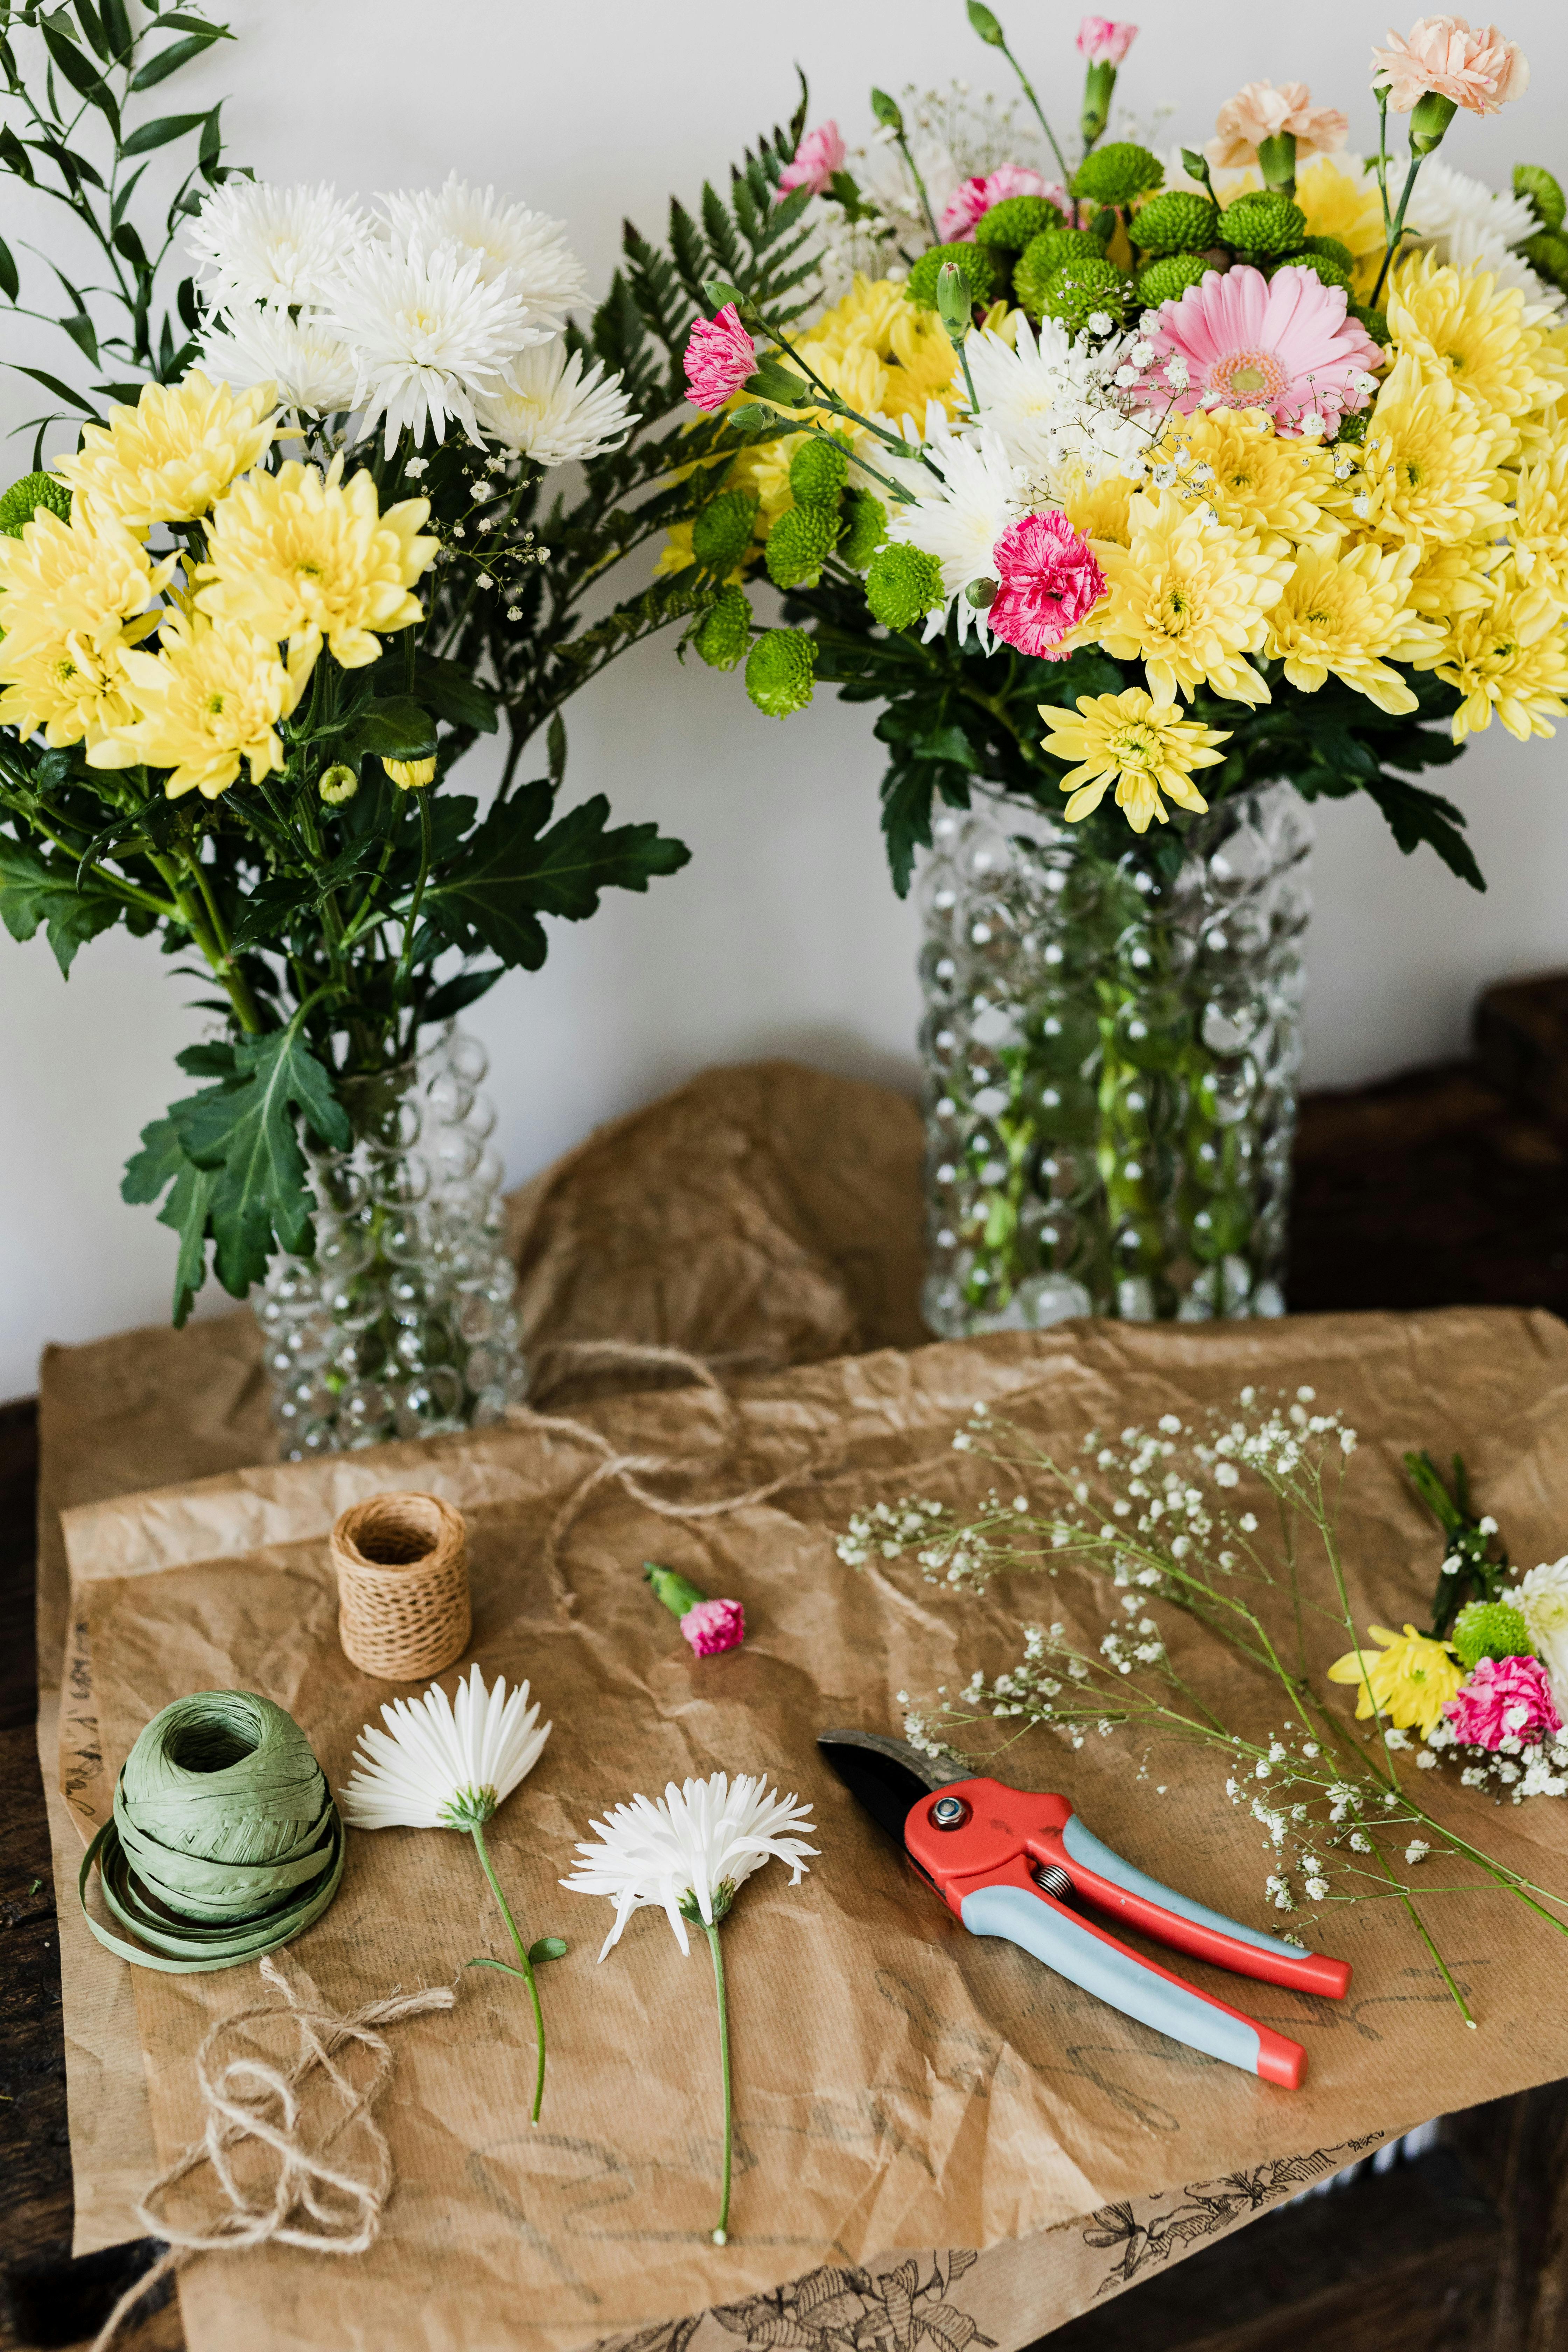 pruner and twine rolls on table with flower bouquets